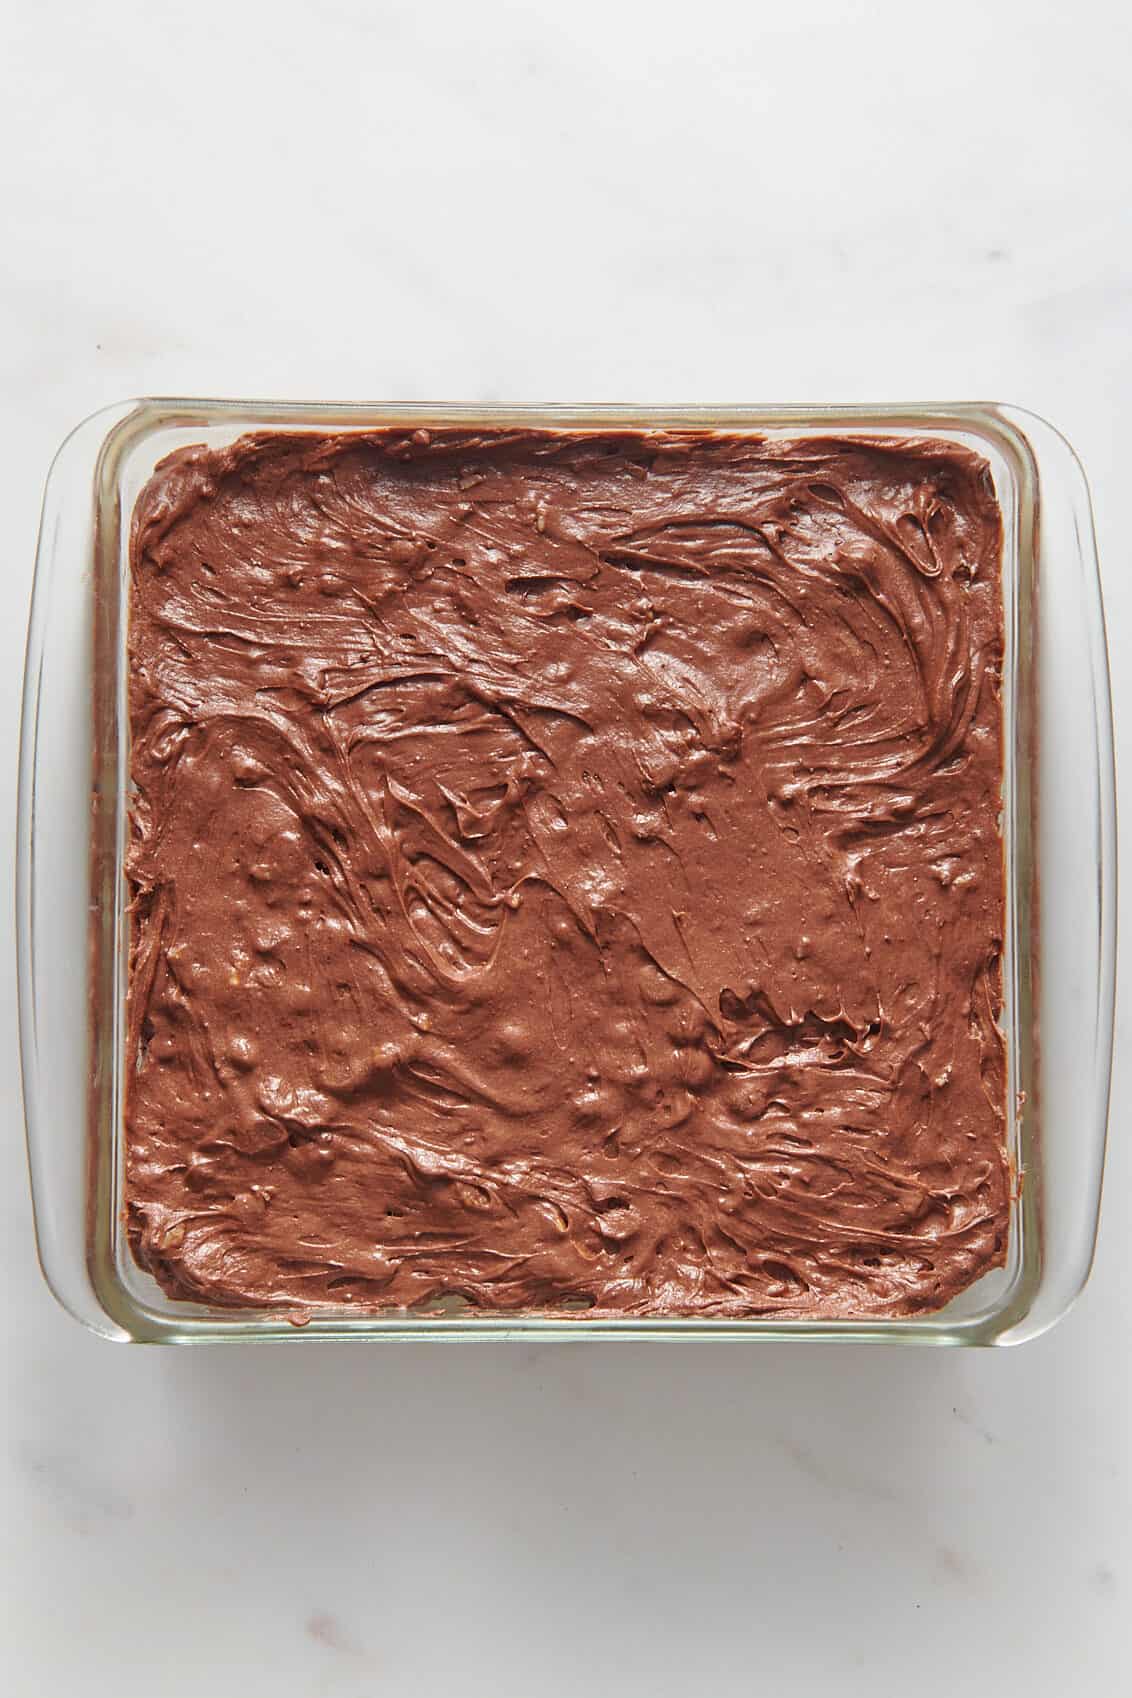 brownie batter layered in a prepared 9x9 glass baking dish.